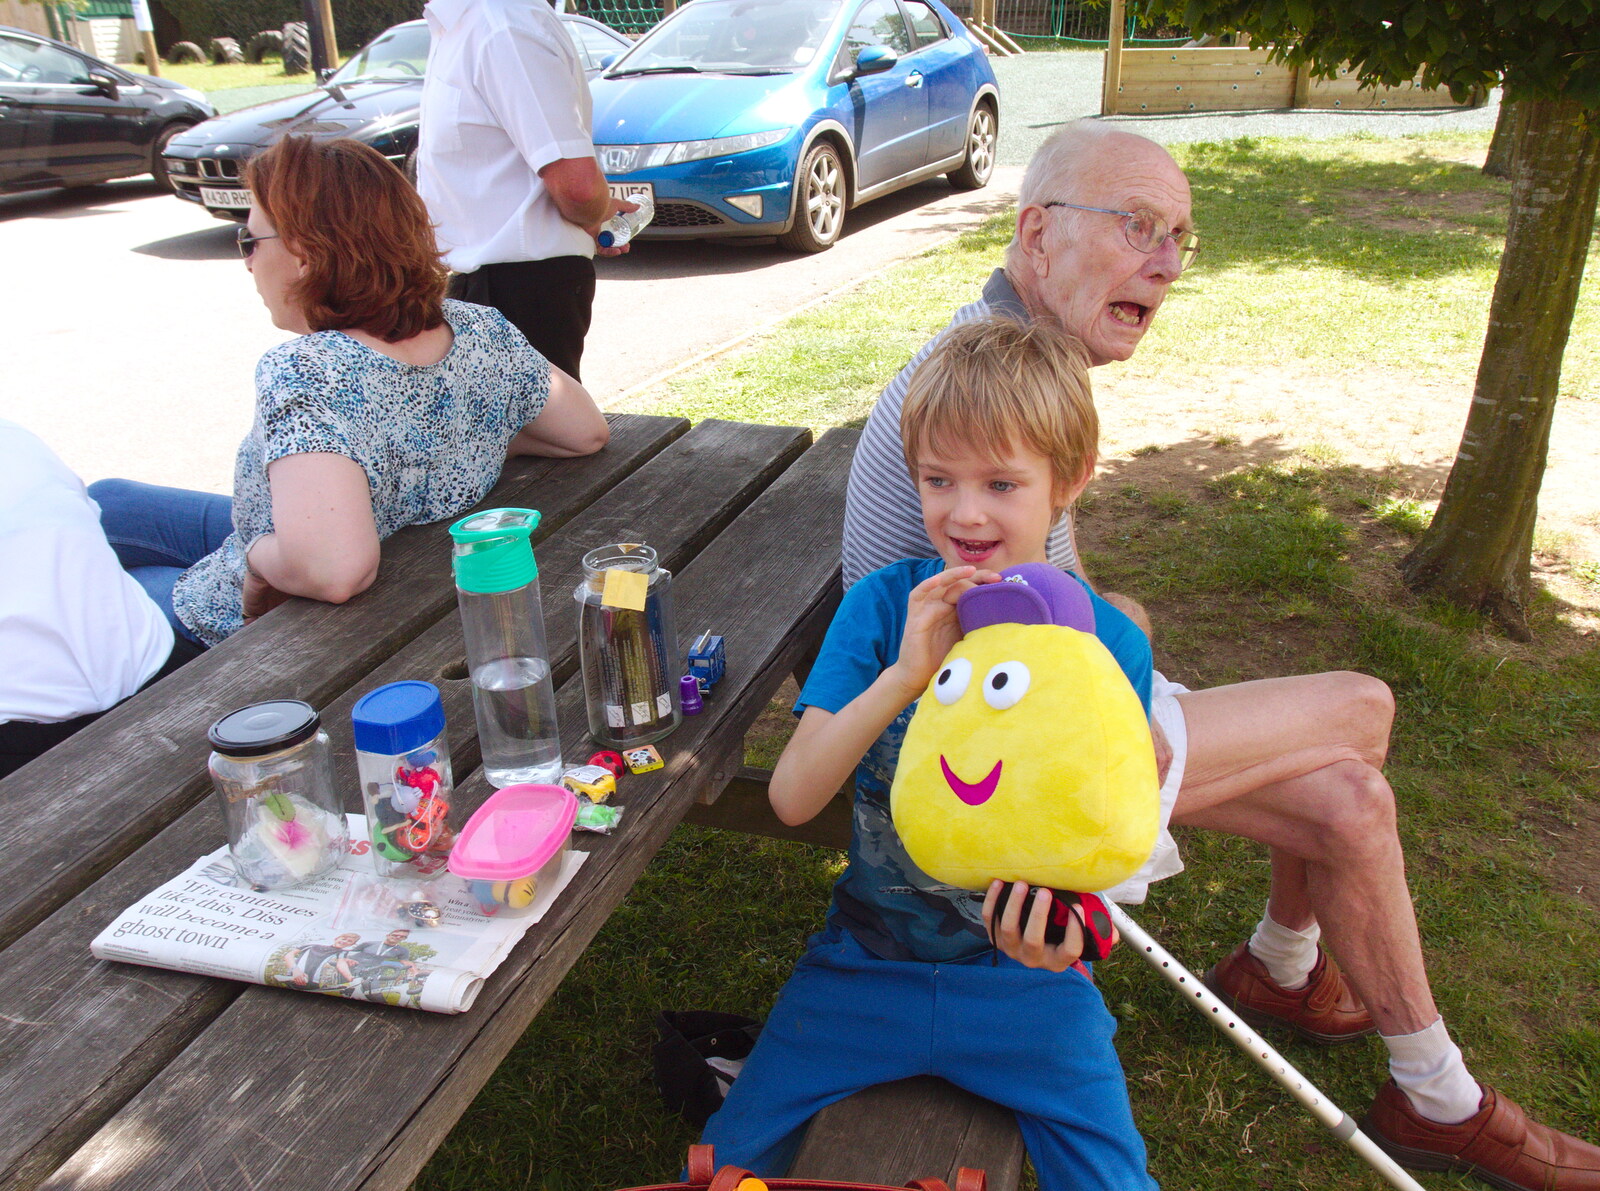 Harry and Grandad from GSB and the Gislingham Fete, Suffolk - 29th June 2019